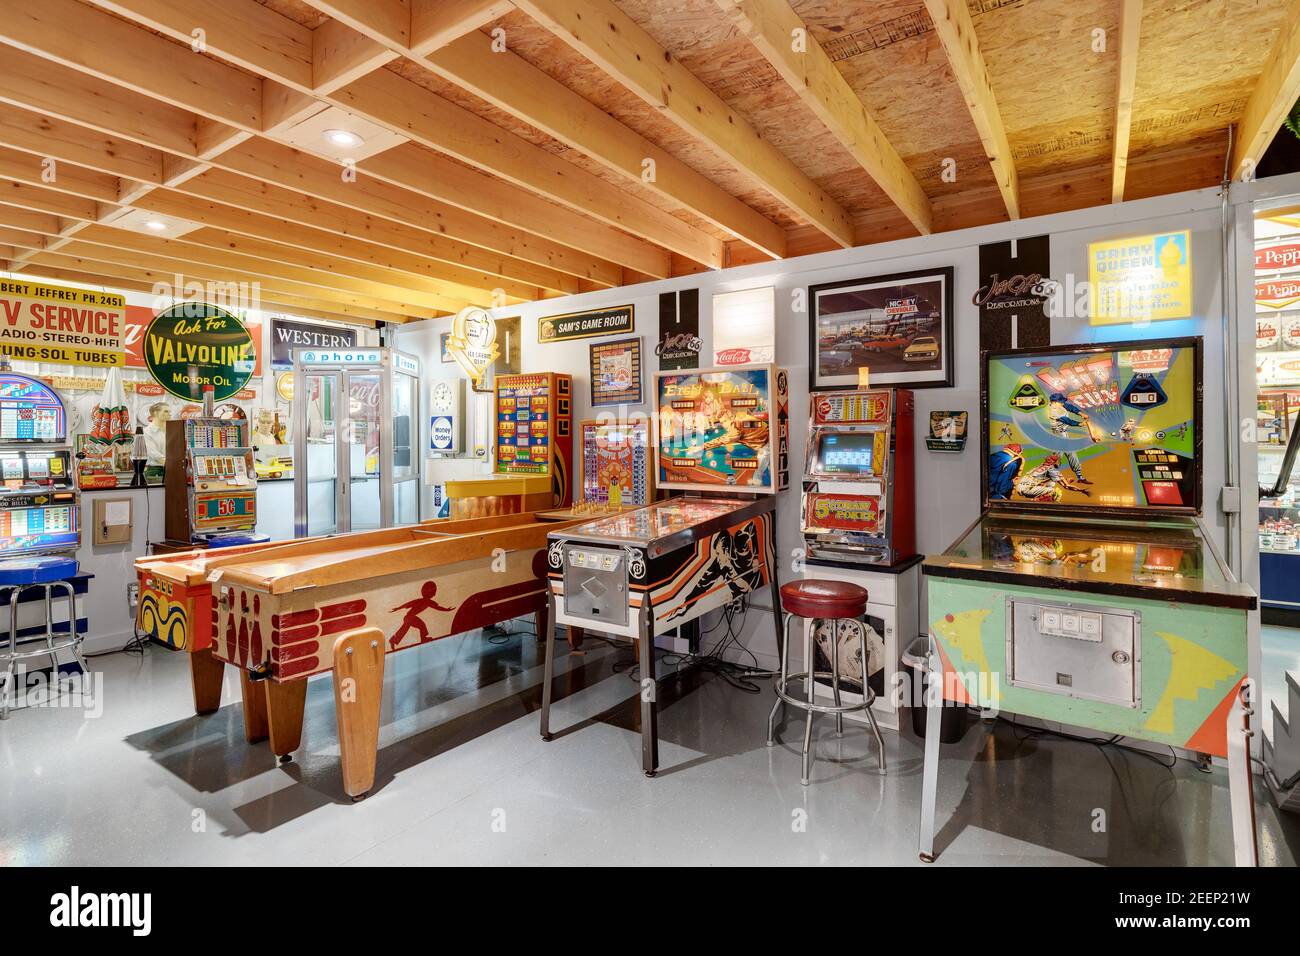 A basement arcade with various retro pinball machines and classic arcade games, old steel and tin company signs, and plenty of seating. Stock Photo